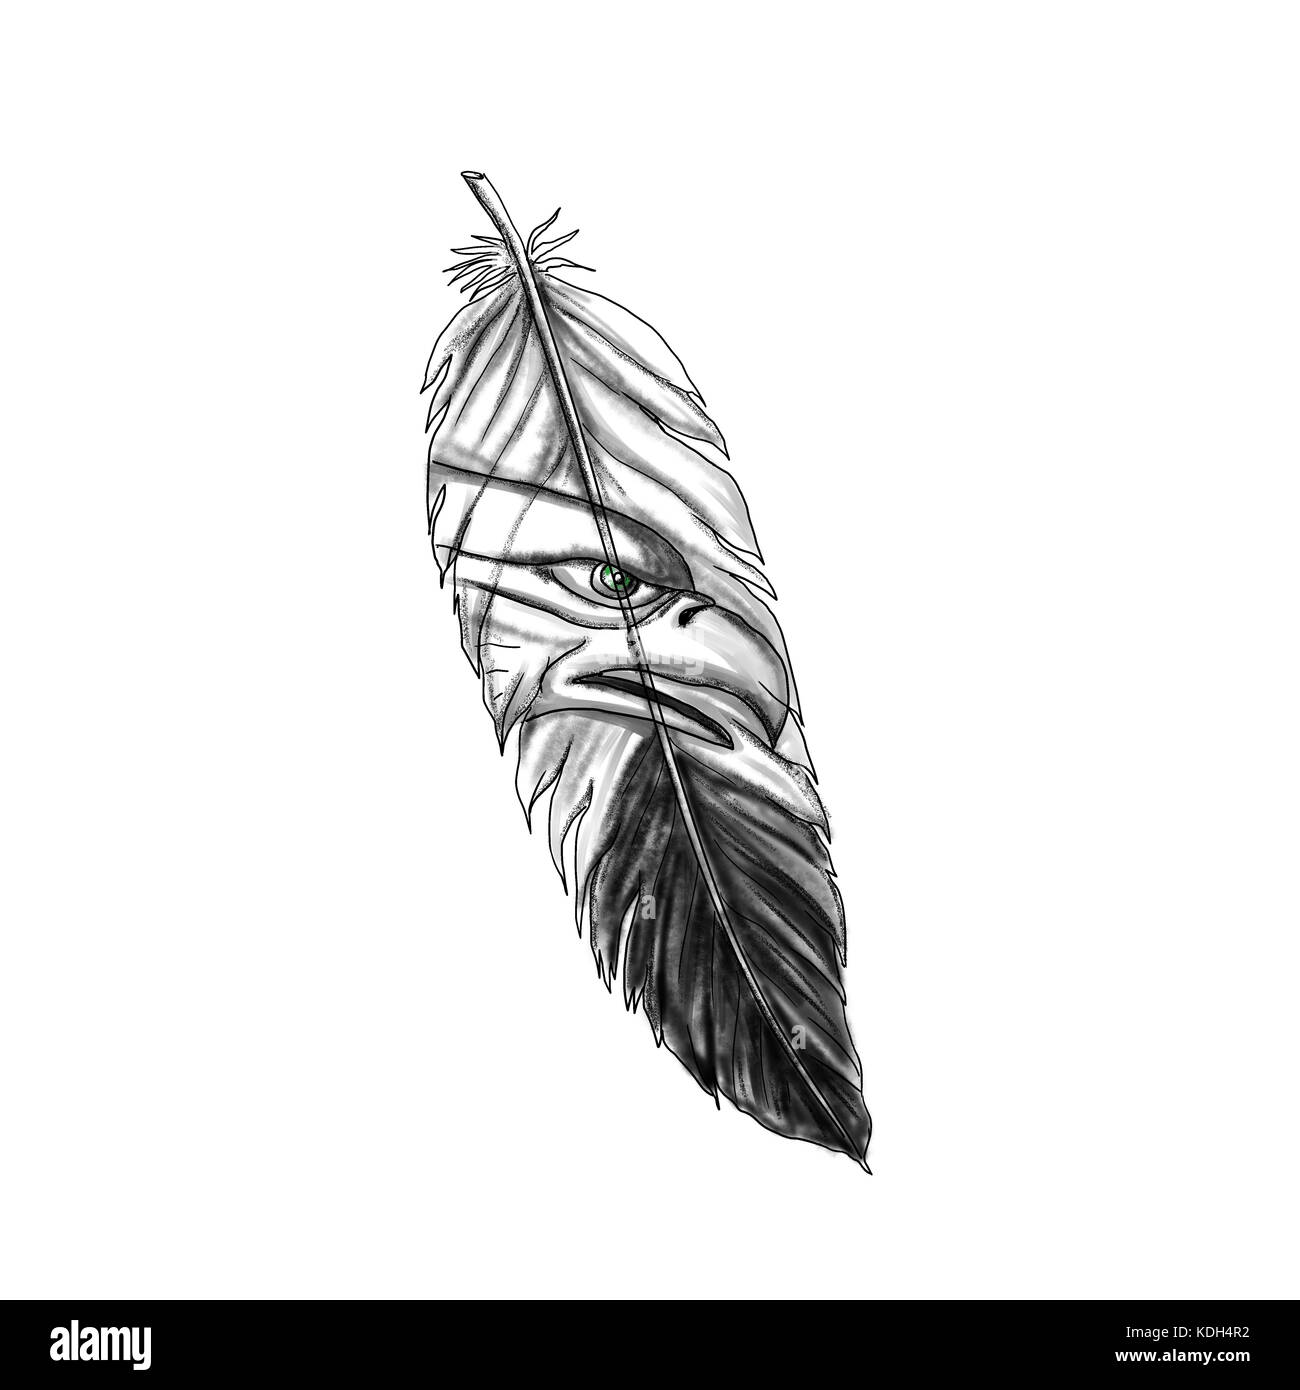 Tattoo style illustration of a feather with sea eagle, seahawk or eagle bird head design on isolated background Stock Photo - Alamy